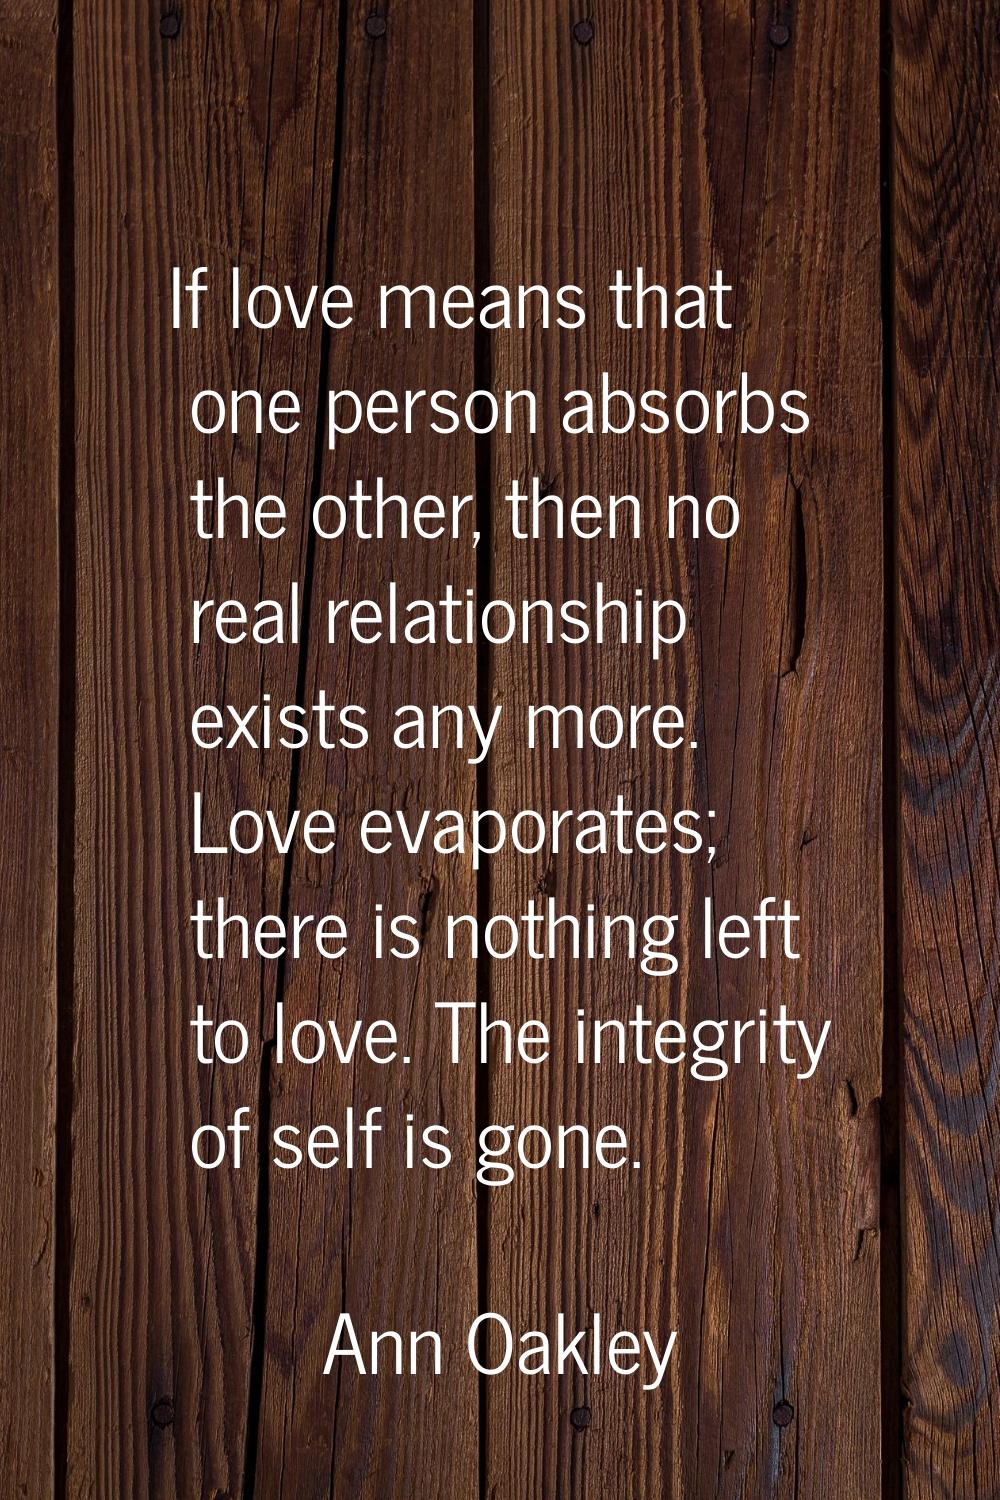 If love means that one person absorbs the other, then no real relationship exists any more. Love ev